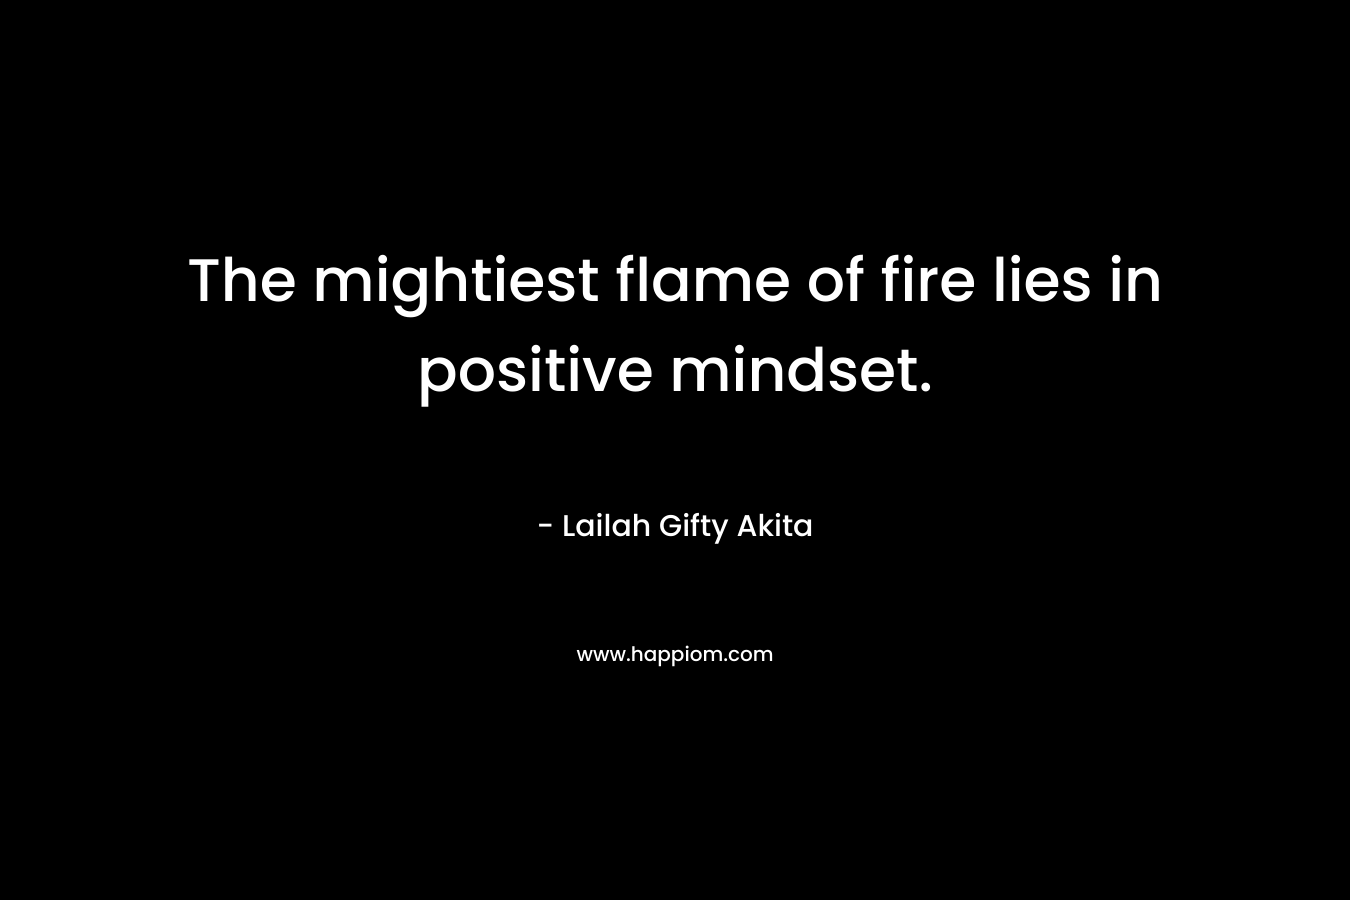 The mightiest flame of fire lies in positive mindset.